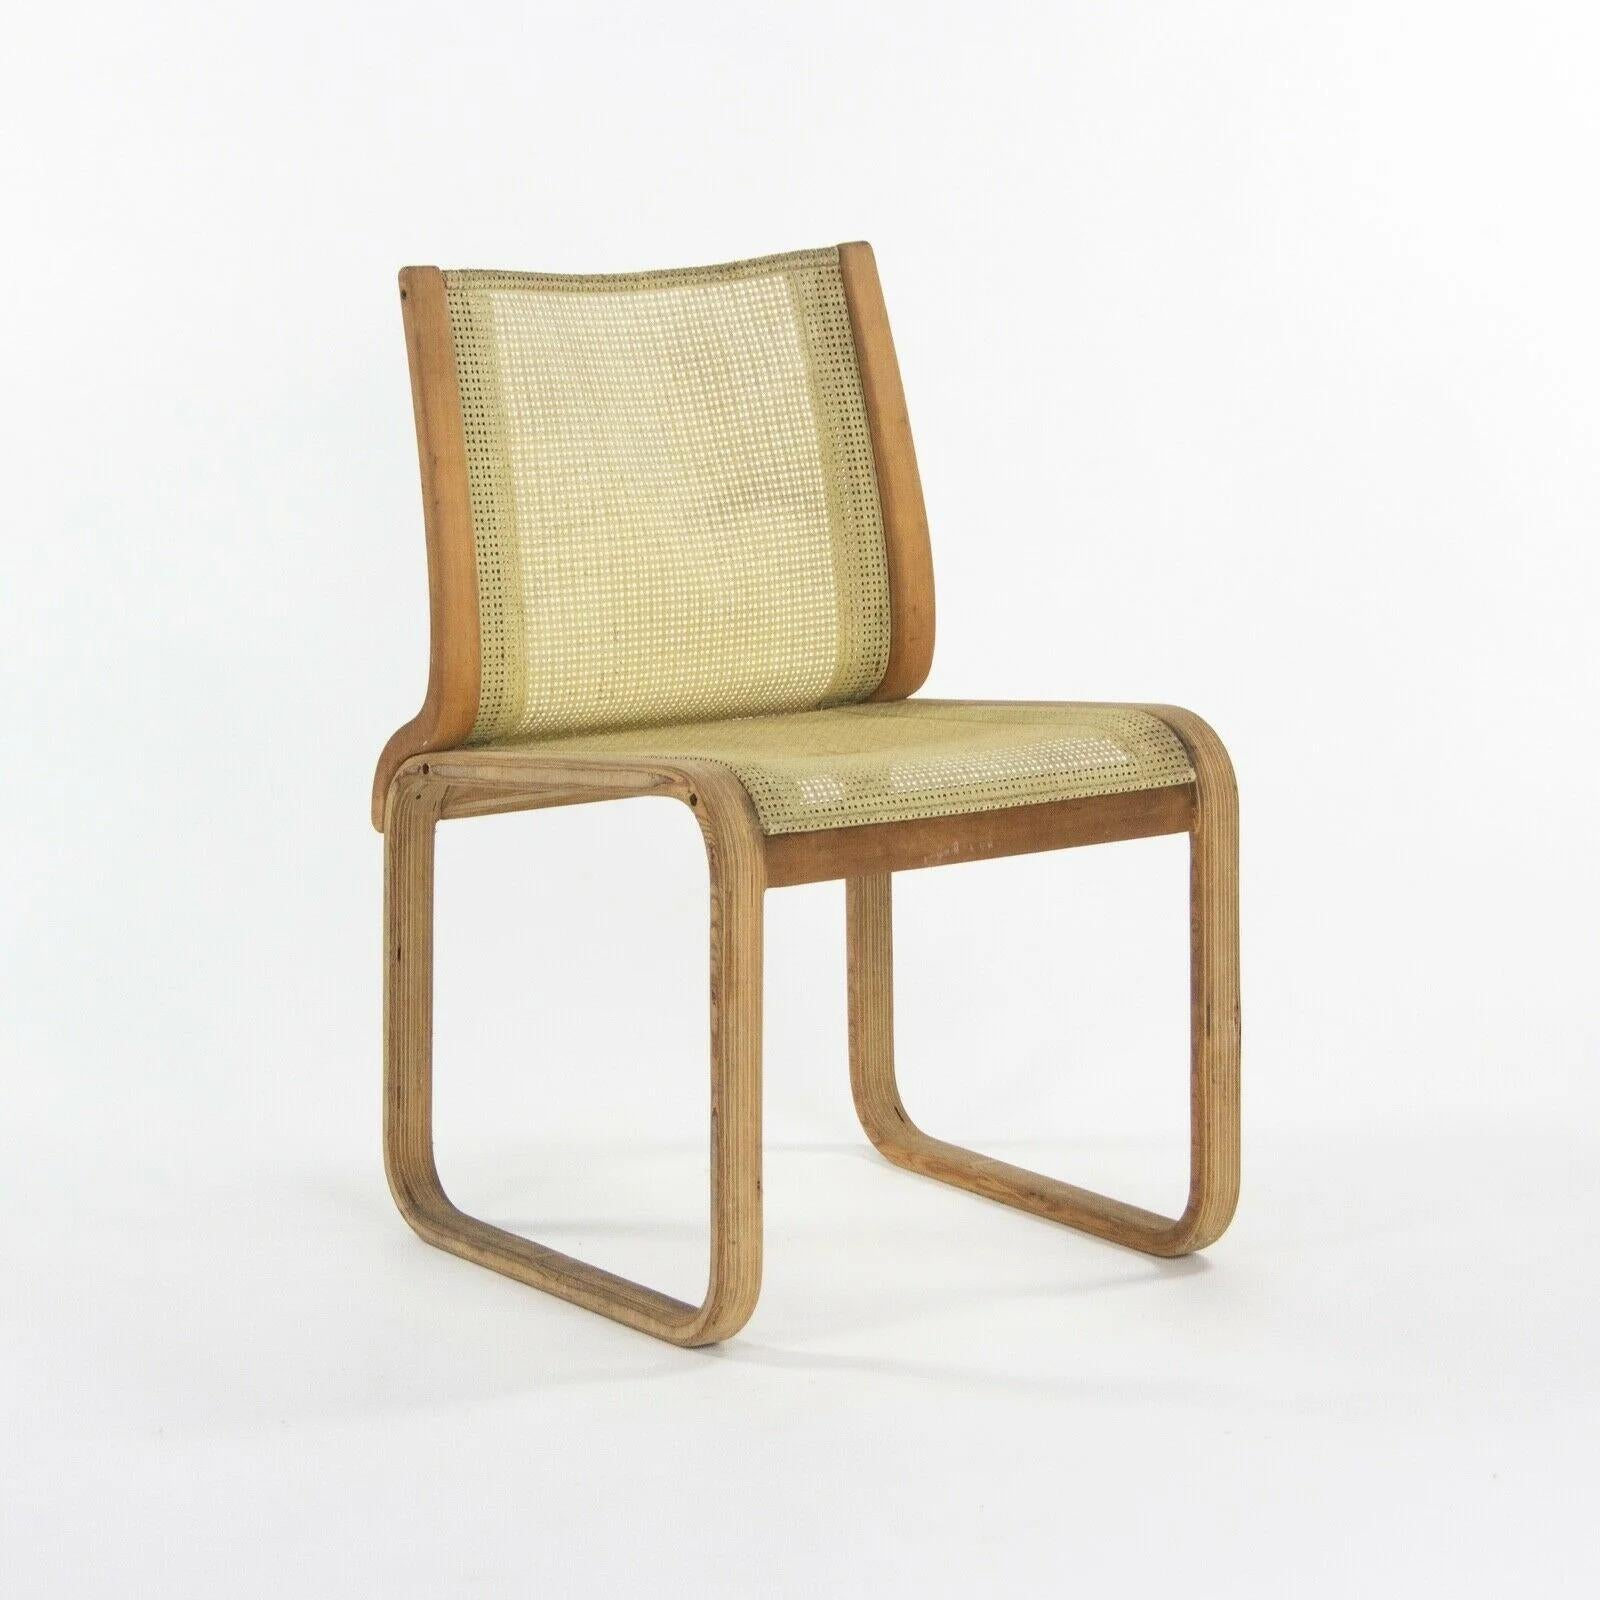 Modern 1985 Prototype Richard Schultz Wooden Outdoor Collection Dining Chair For Sale